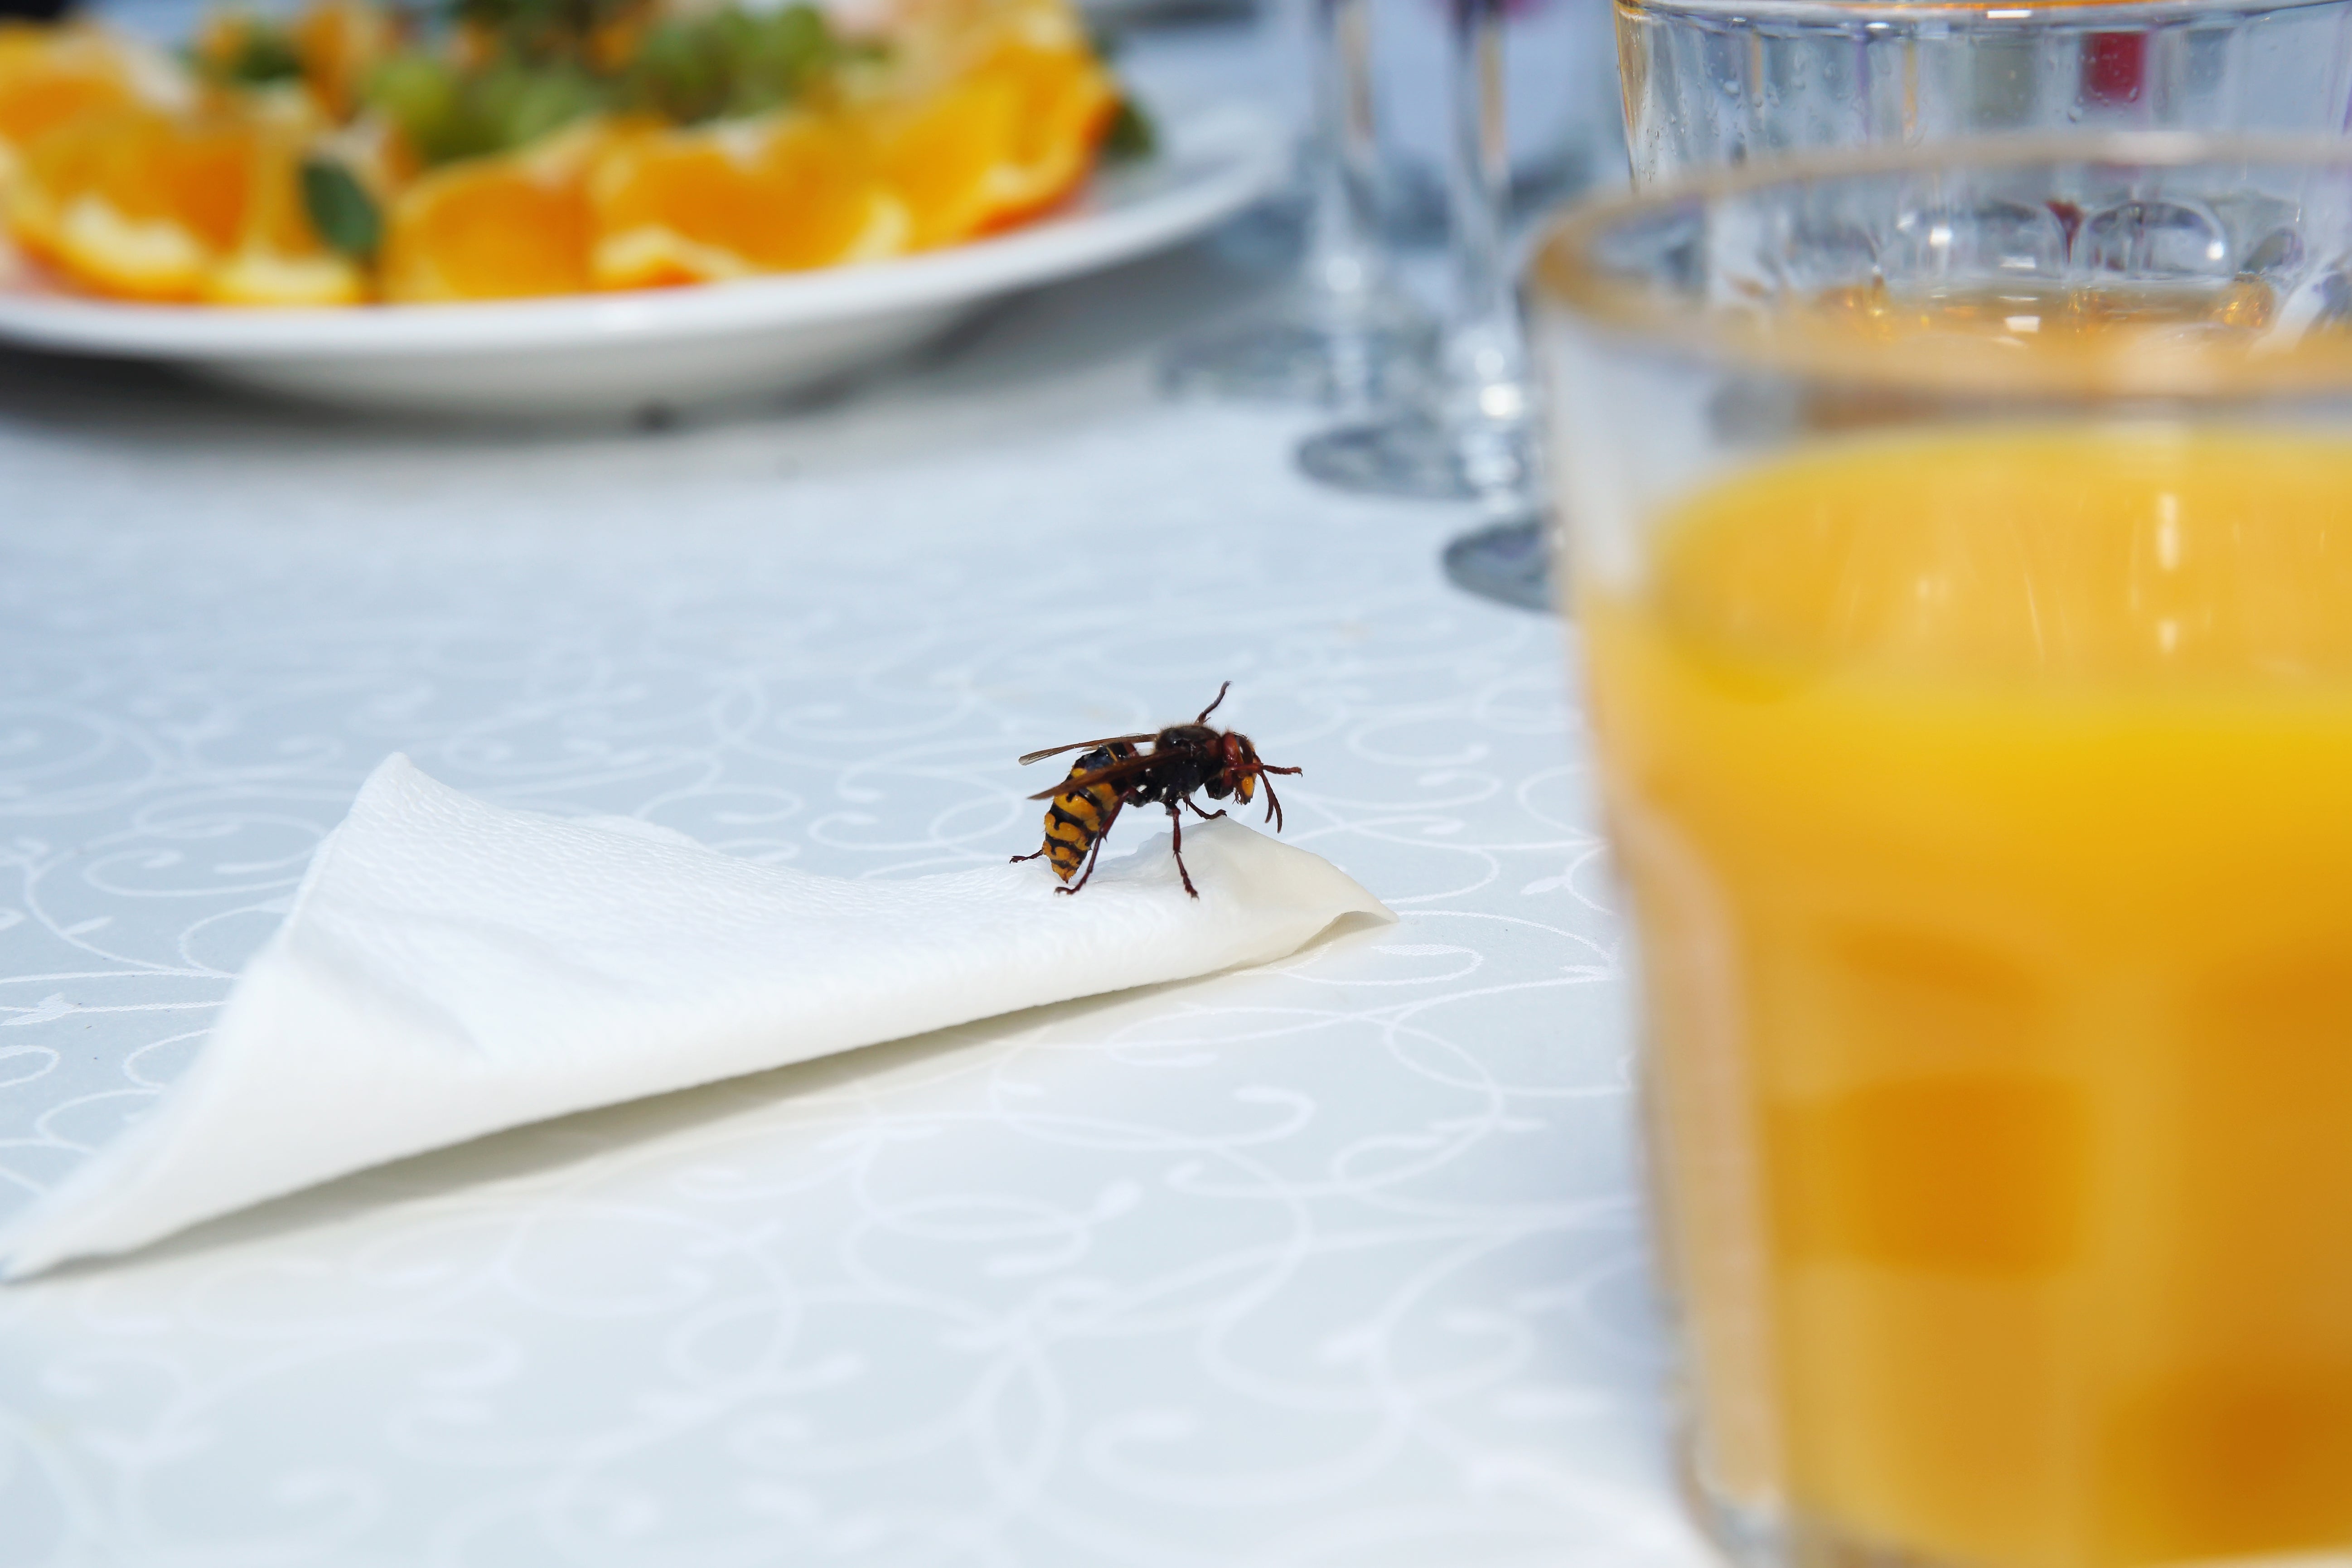 A wasp forages for food on a table outside